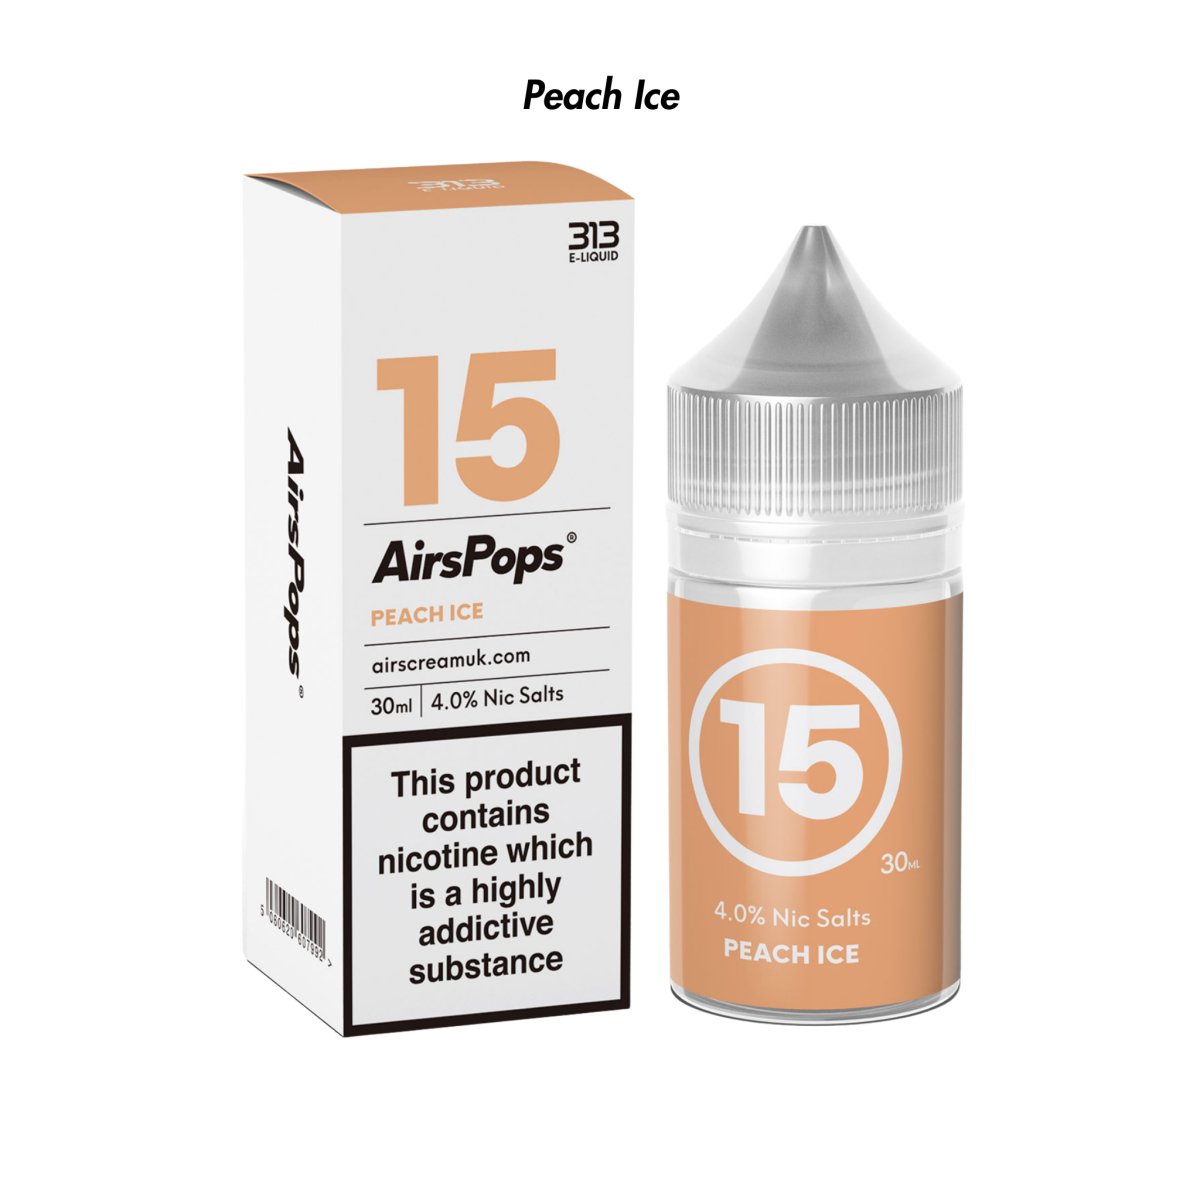 Peach Ice 313 AirsPops E-Liquid 19mg from The Smoke Organic Store with Fast Delivery in South Africa